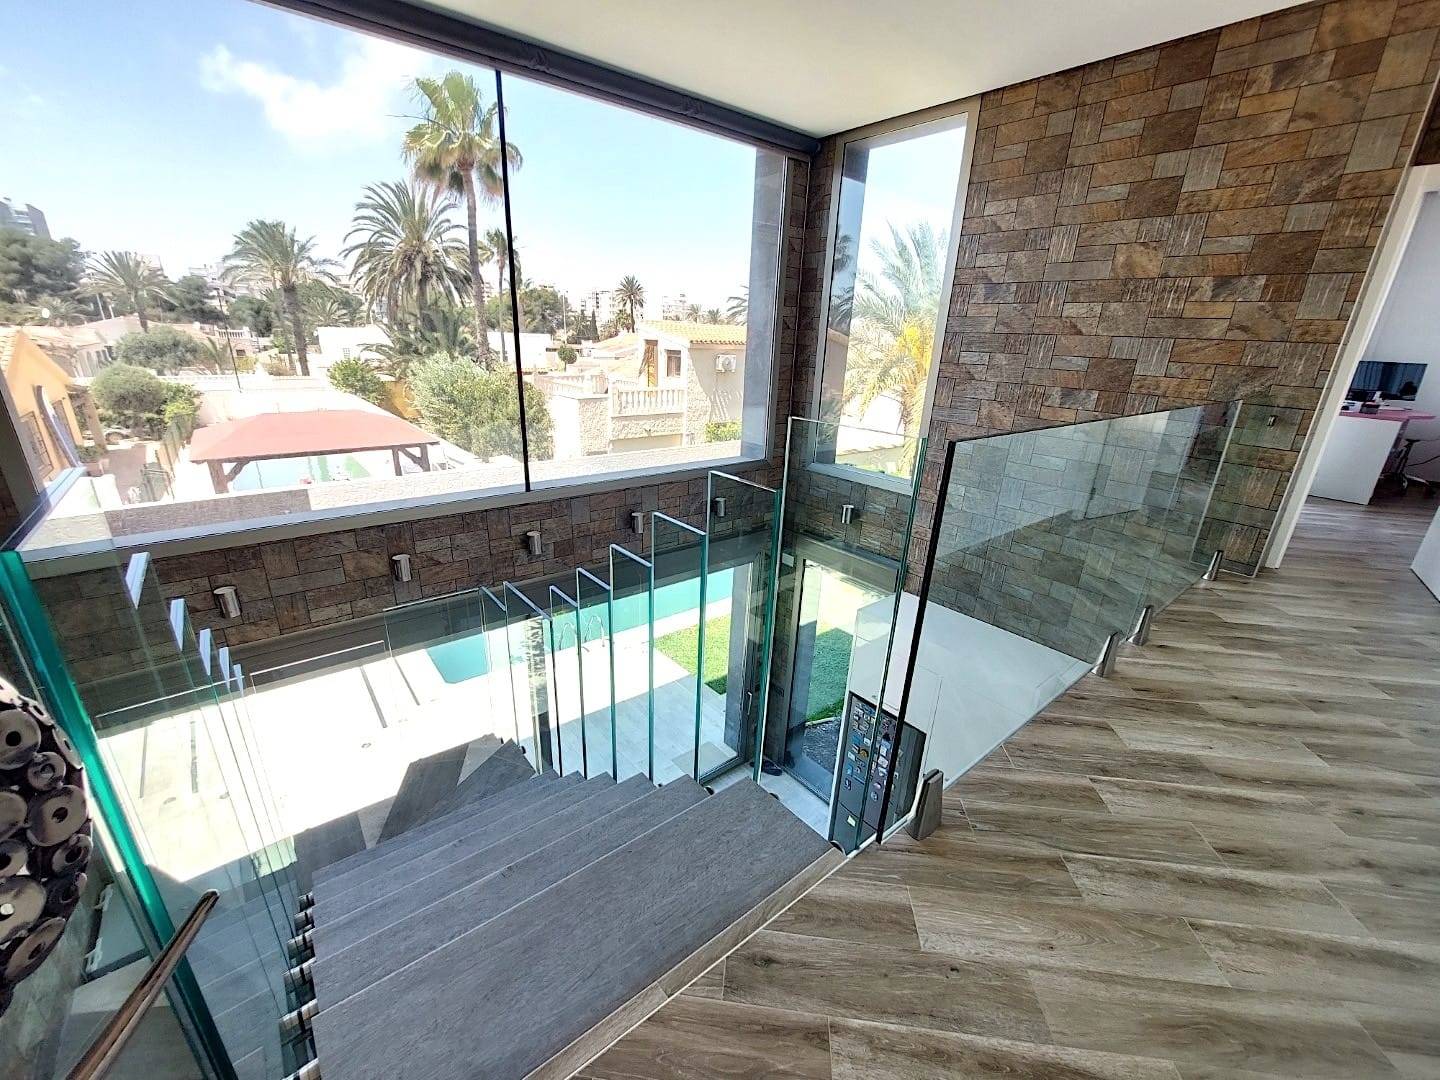 LUXURY VILLA IN URB. LOS ANGELES WITH SALTWATER POOL AND NICE PLOT